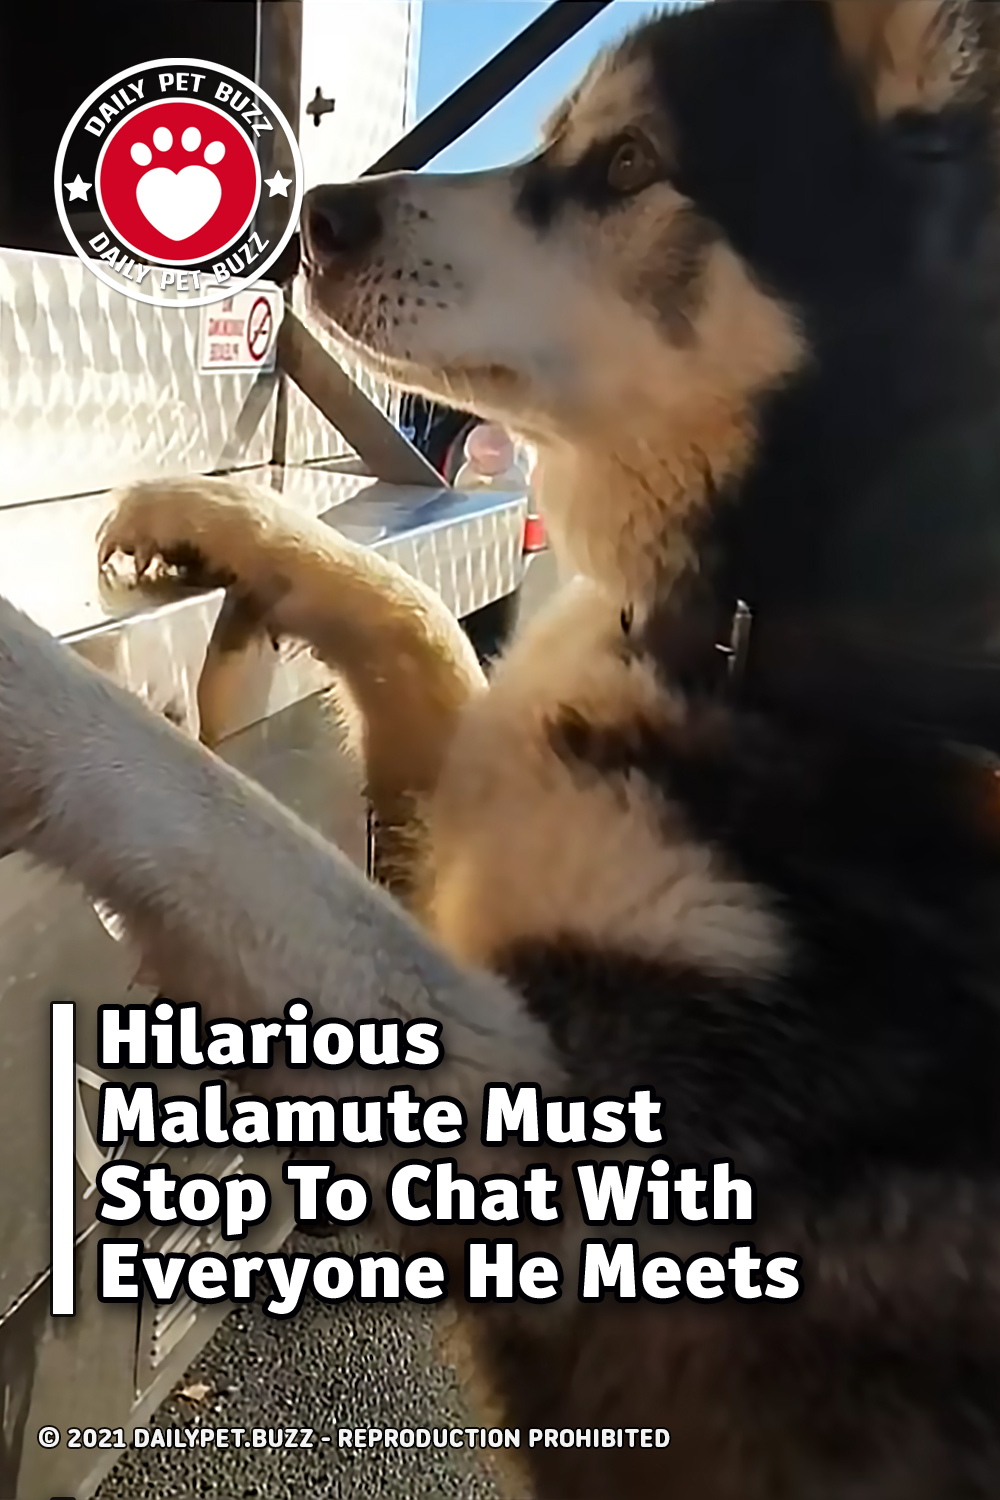 Hilarious Malamute Must Stop To Chat With Everyone He Meets